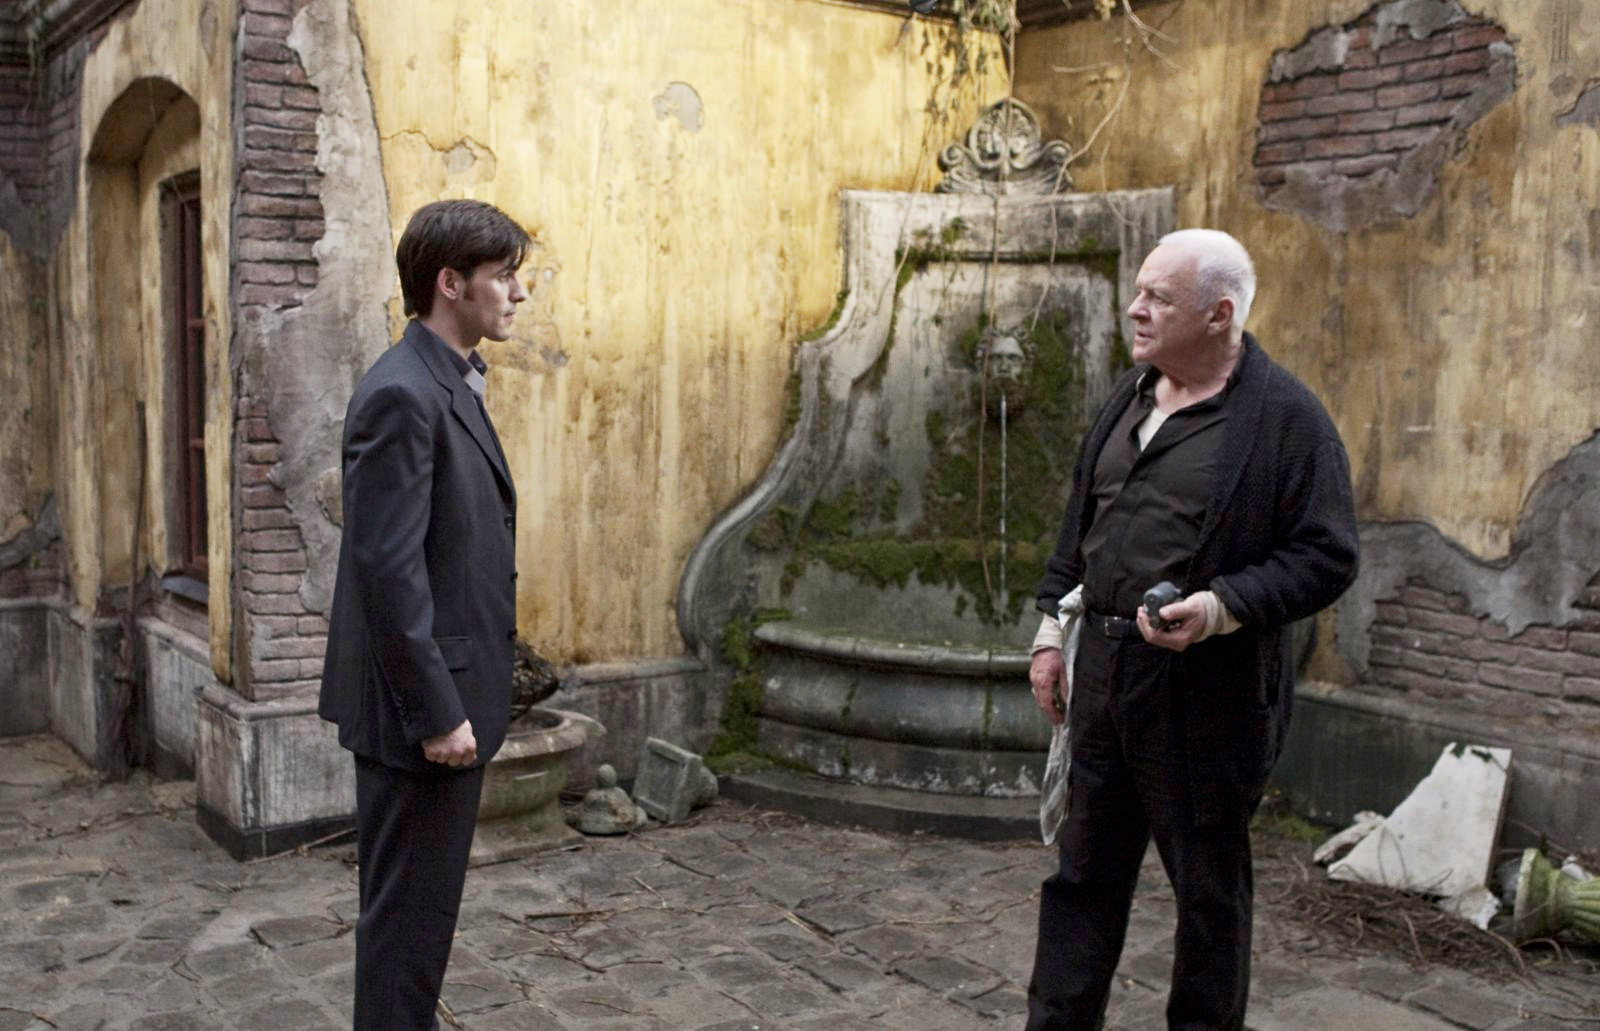 Colin O'Donoghue stars as Michael Kovak and Anthony Hopkins stars as Father Lucas in Warner Bros. Pictures' The Rite (2011). Photo credit by Egon Endrenyi.